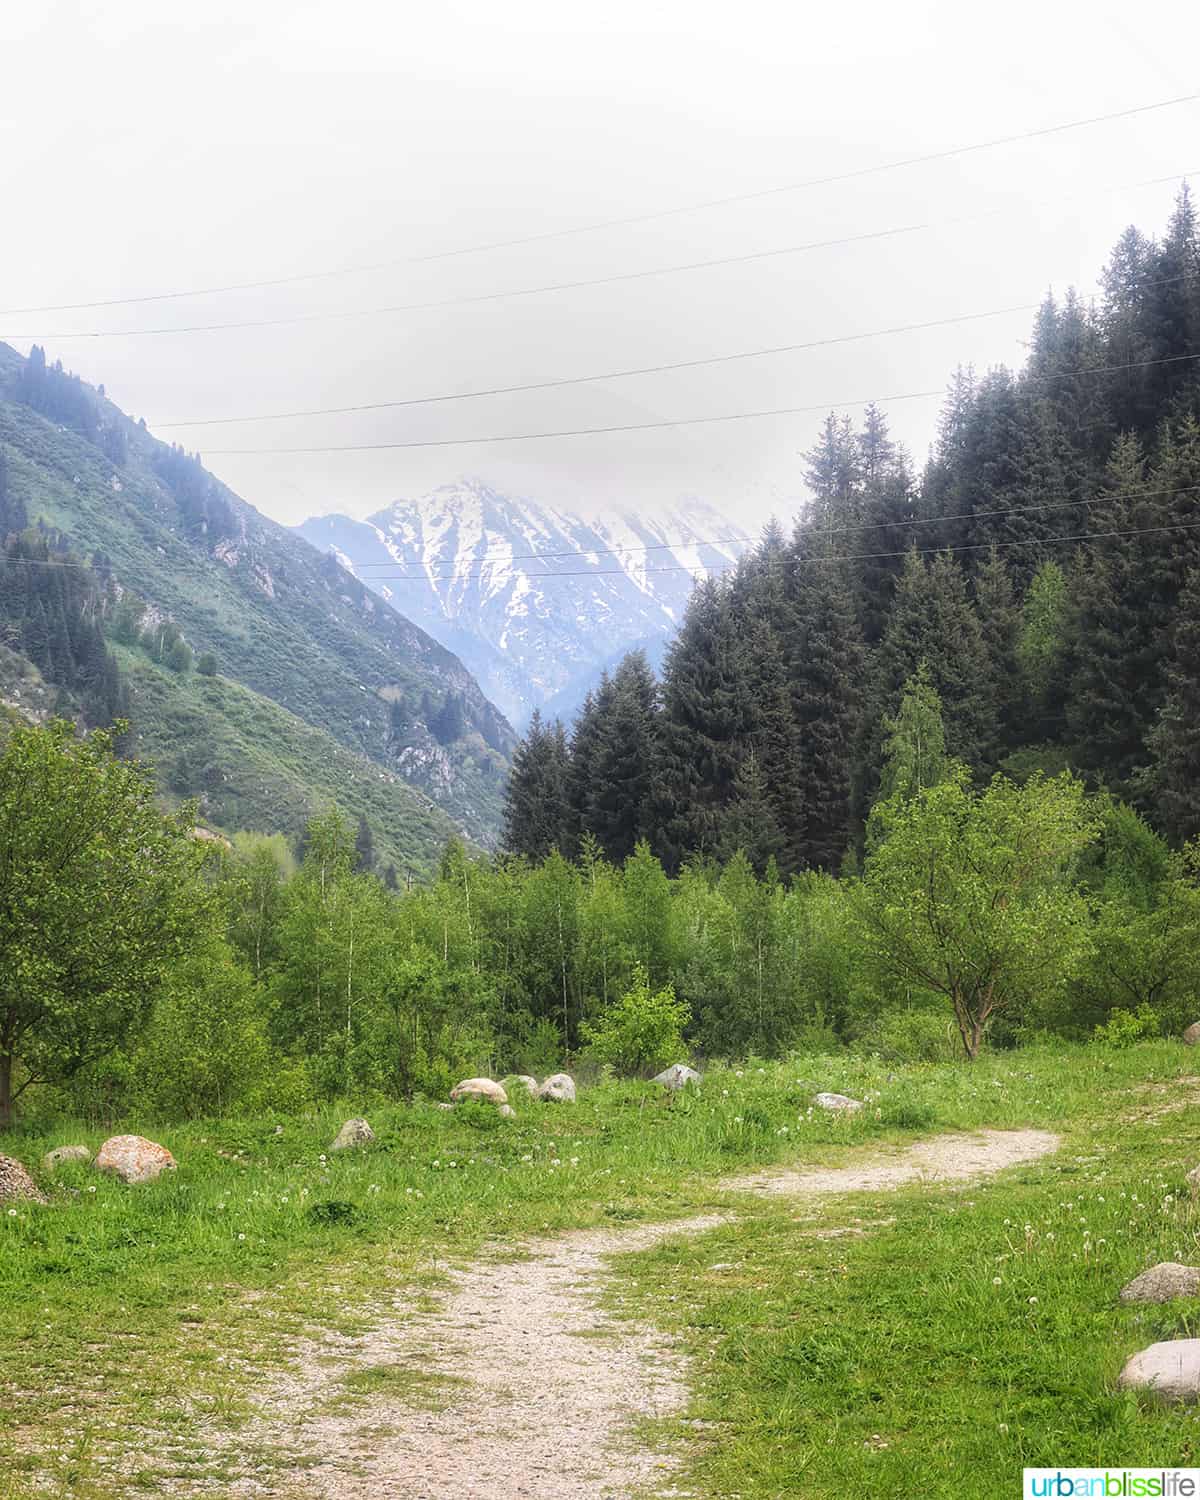 mountains and trees and a hiking trail near almaty kazakhstan.